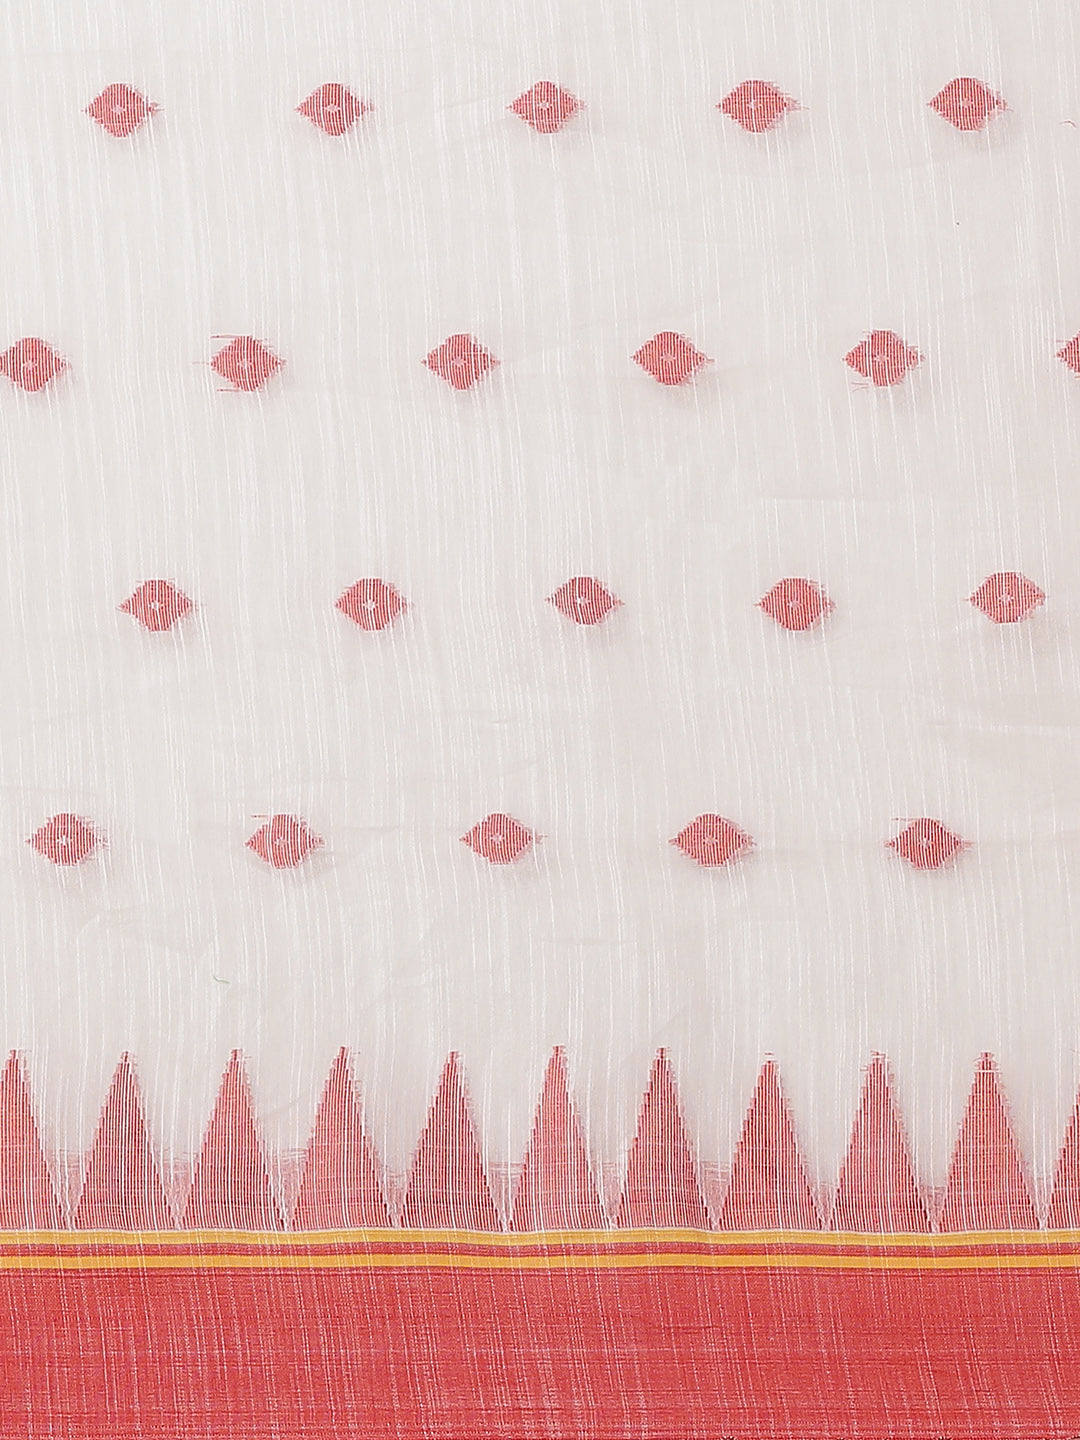 White and Red, Kalakari India Ikat Silk Cotton Woven Design Saree with Blouse SHBESA0036-Saree-Kalakari India-SHBESA0036-Bengal, Cotton, Geographical Indication, Hand Crafted, Heritage Prints, Ikkat, Natural Dyes, Red, Sarees, Sustainable Fabrics, Woven, Yellow-[Linen,Ethnic,wear,Fashionista,Handloom,Handicraft,Indigo,blockprint,block,print,Cotton,Chanderi,Blue, latest,classy,party,bollywood,trendy,summer,style,traditional,formal,elegant,unique,style,hand,block,print, dabu,booti,gift,present,gla